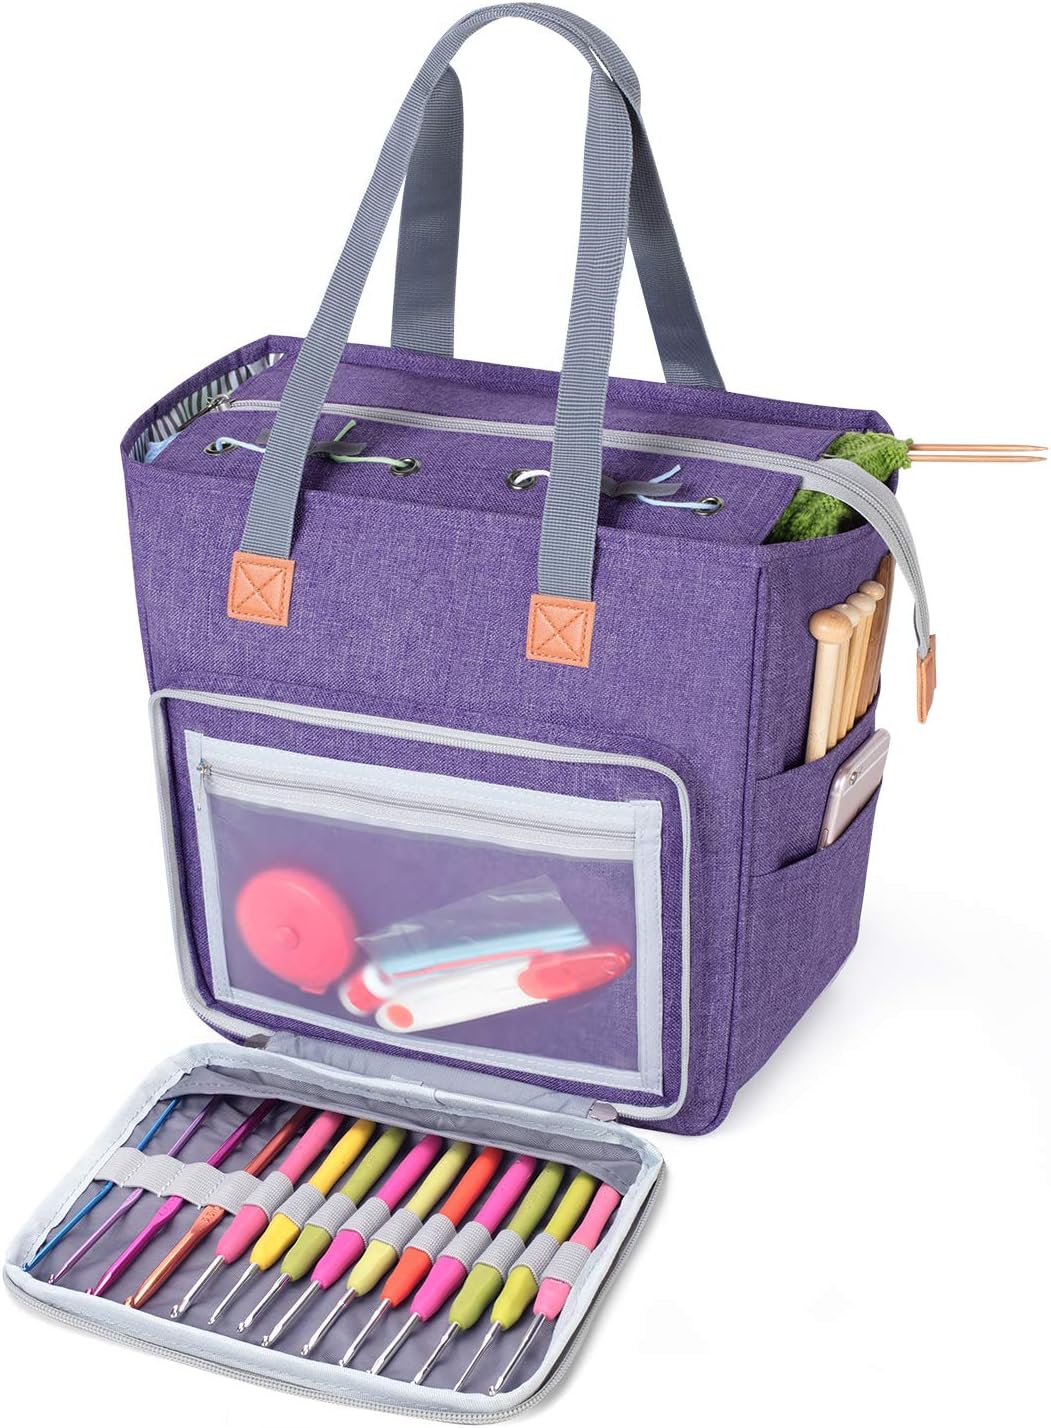 Luxja Small Knitting Tote Bag, Yarn Storage Bag for Carrying Projects, Knitting Needles, Crochet Hooks and Other Accessories, Purple